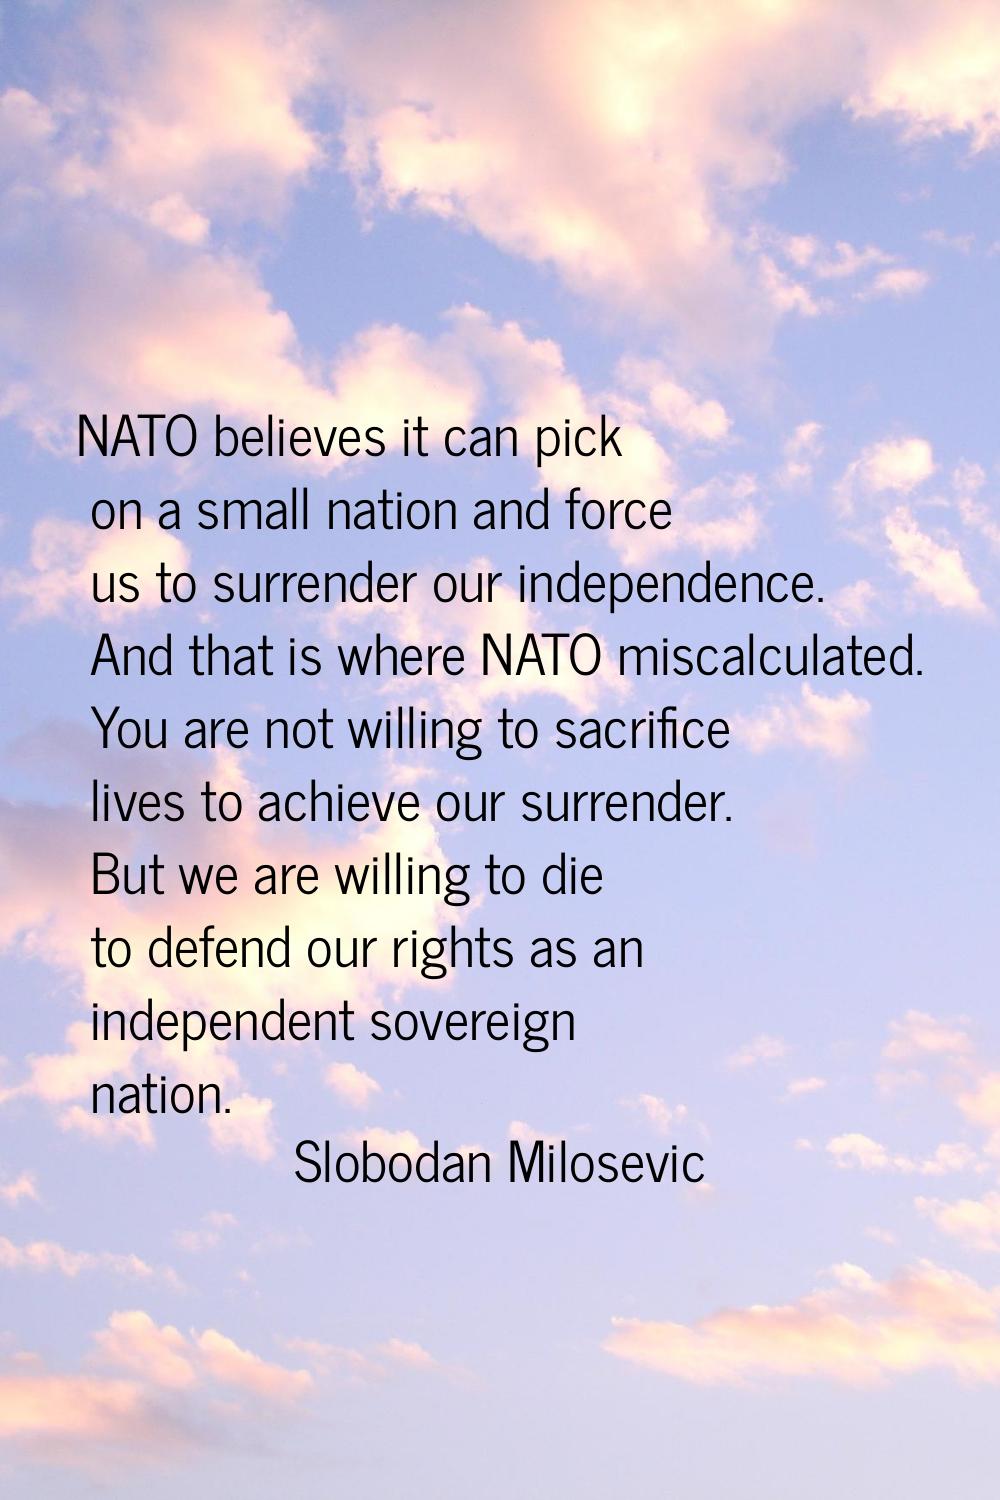 NATO believes it can pick on a small nation and force us to surrender our independence. And that is